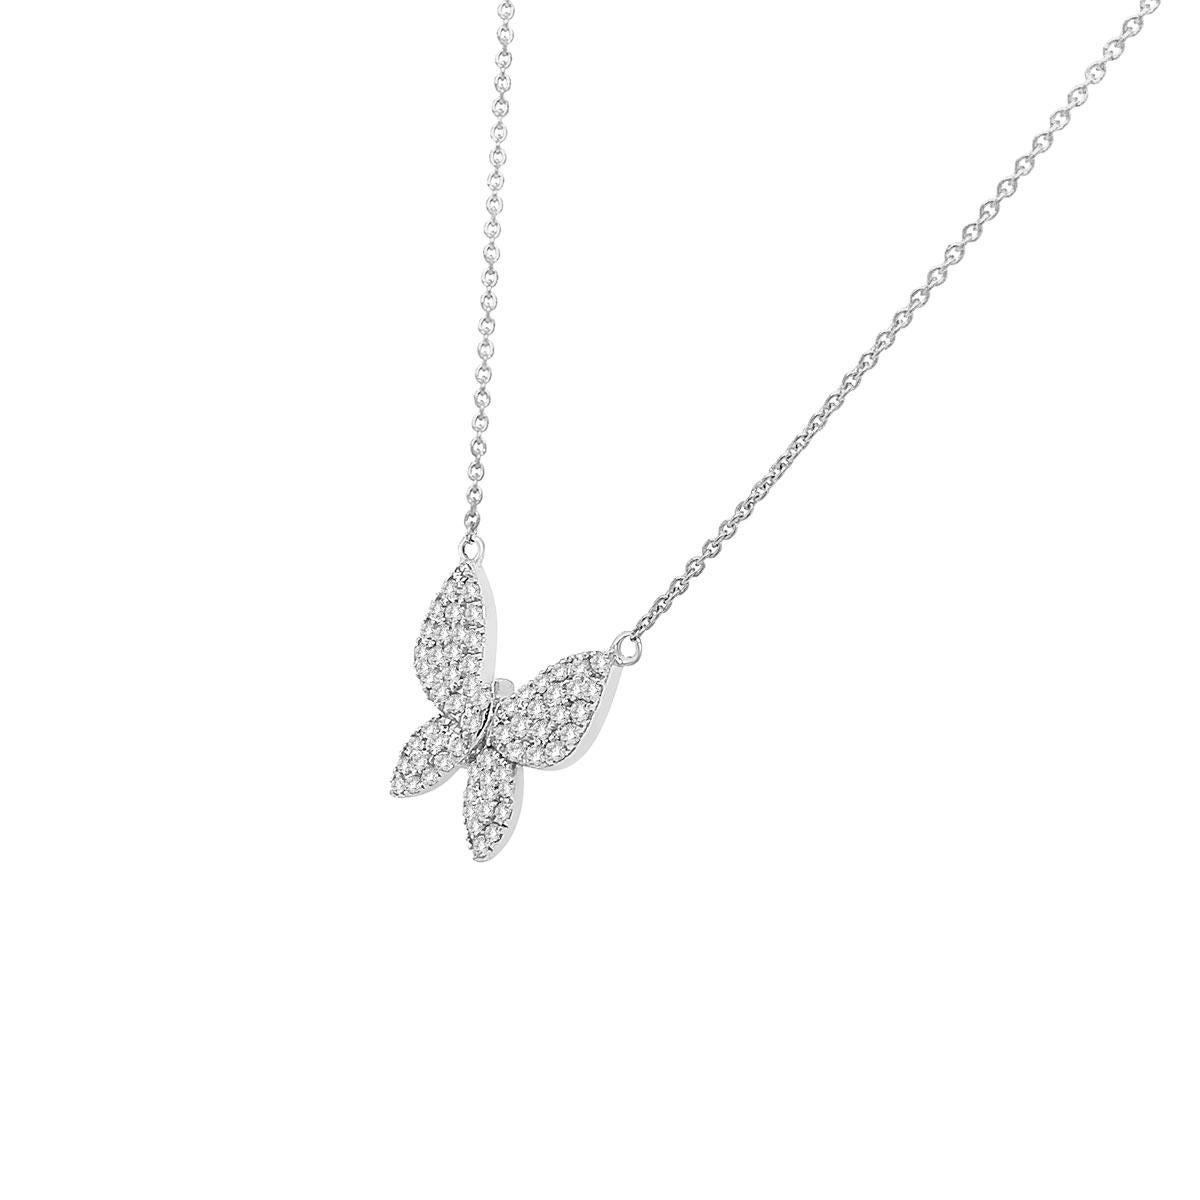 This delicate necklace features a 16 MMx16 MM Butterfly diamond pendent micro-prong-set stationed on a thin gold chain. Experience the difference in person!

Product details: 

Center Gemstone Type: NATURAL DIAMOND
Center Gemstone Shape: